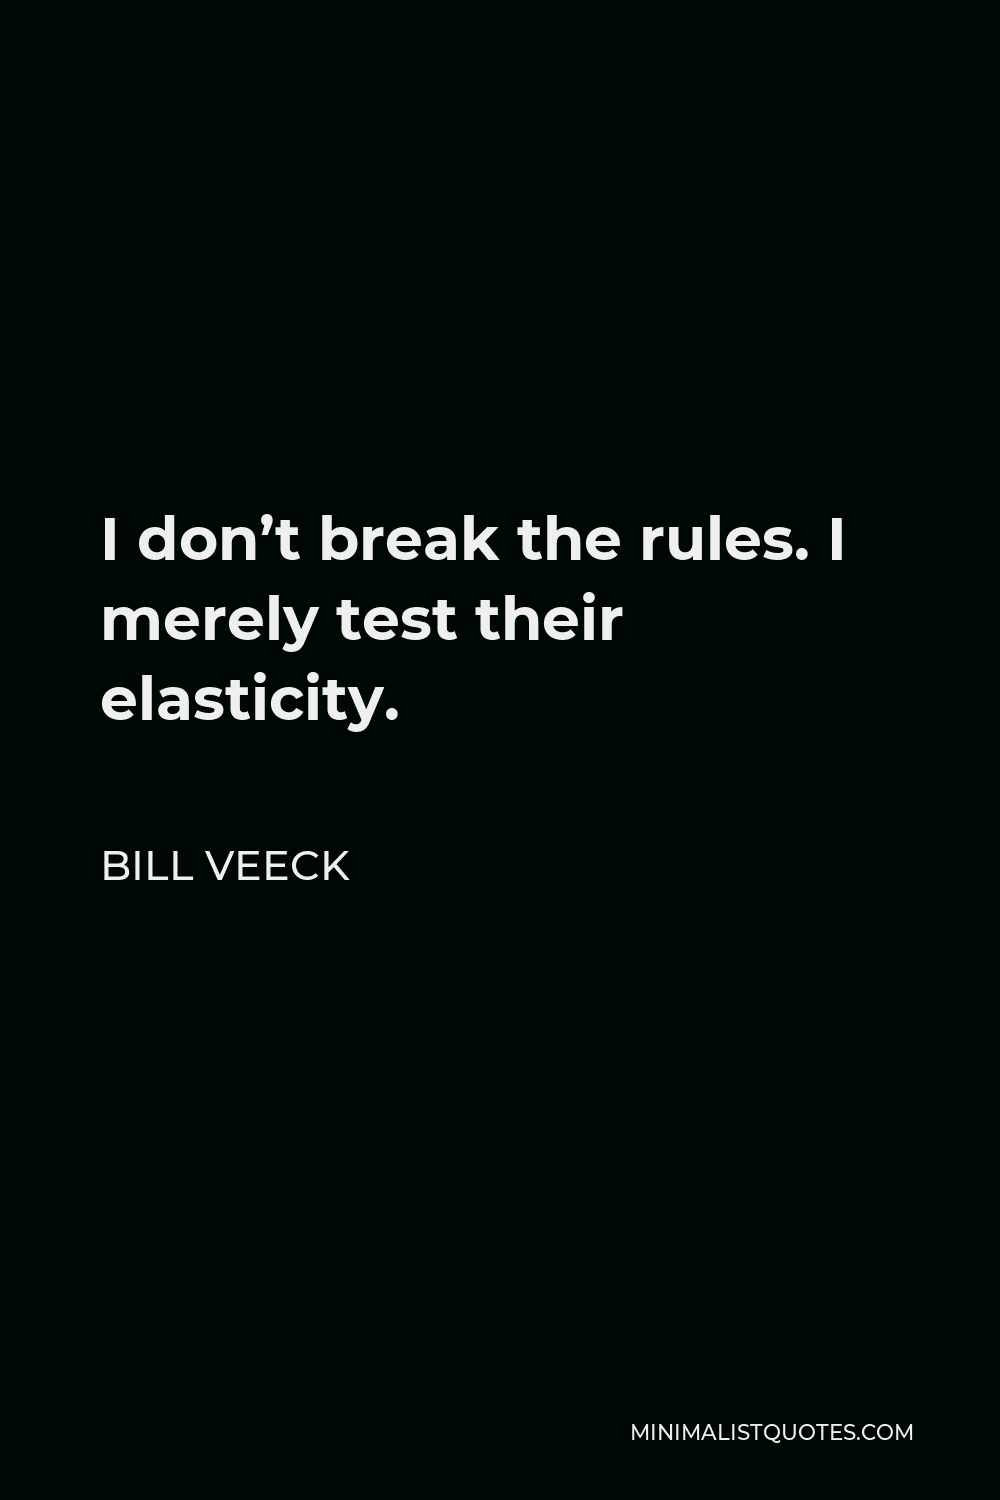 Bill Veeck Quote - I don’t break the rules. I merely test their elasticity.